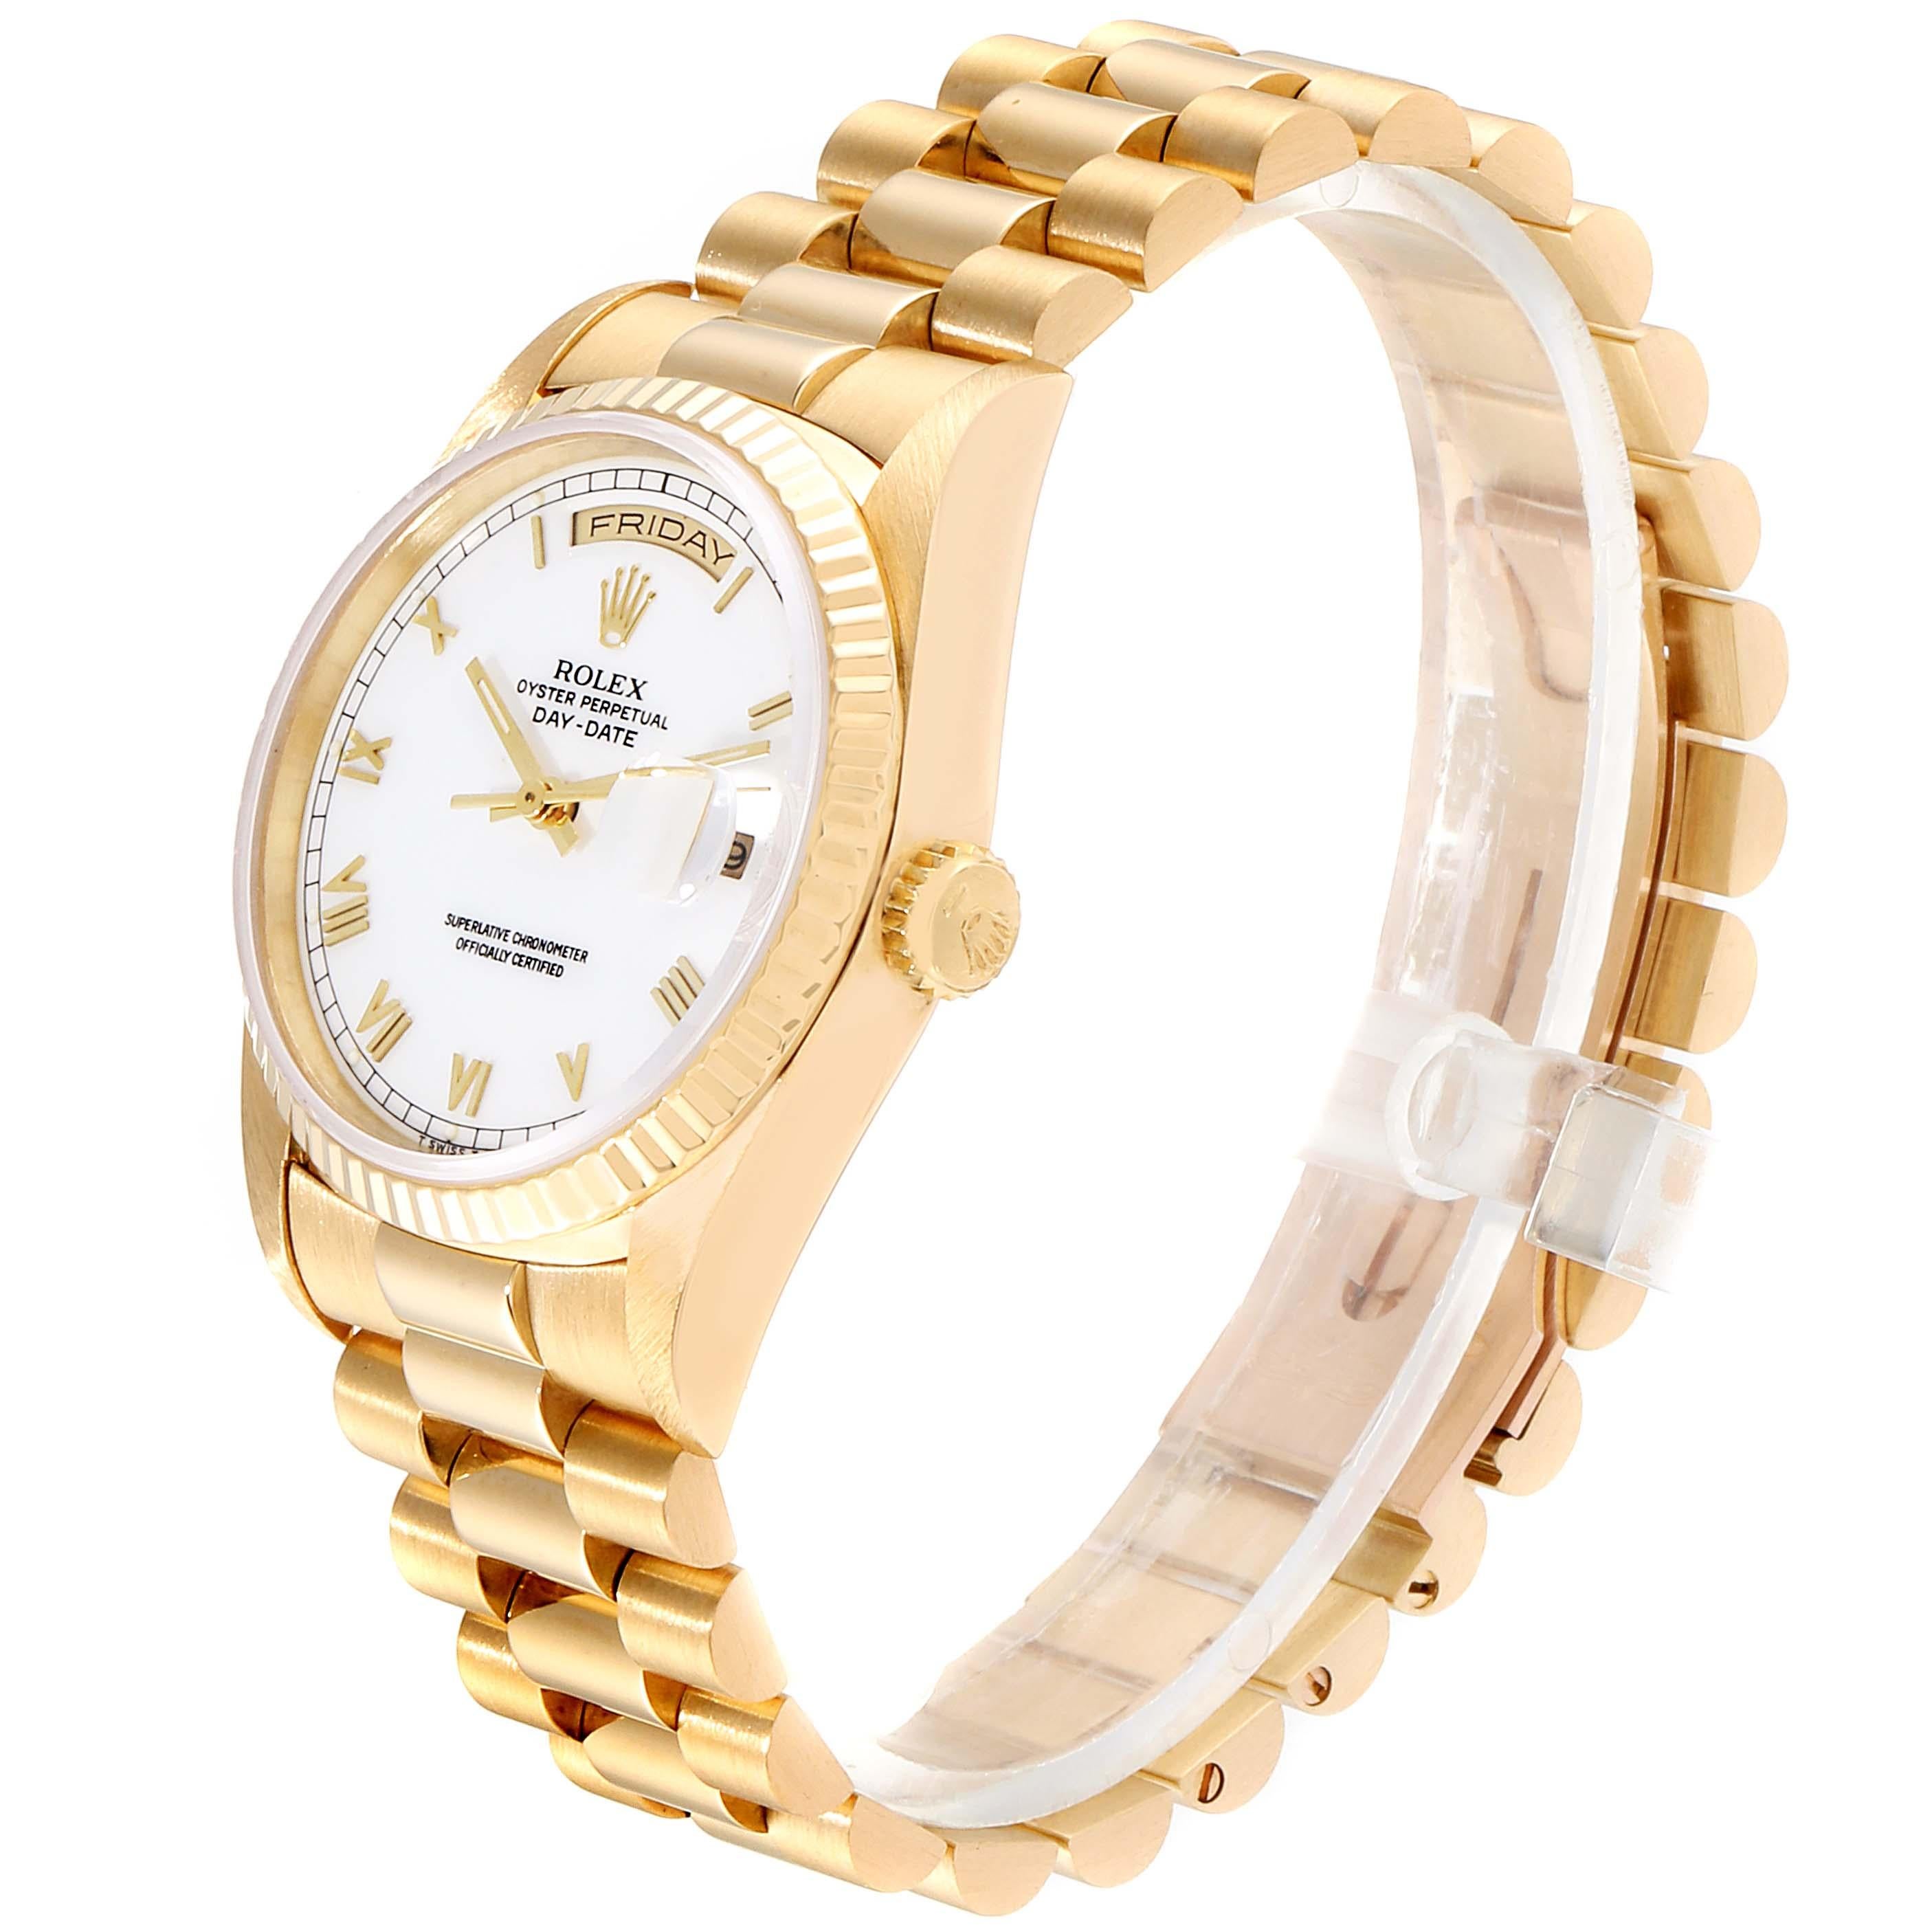 Rolex President Day-Date 18 Karat Yellow Gold White Dial Men's Watch 18238 In Excellent Condition For Sale In Atlanta, GA